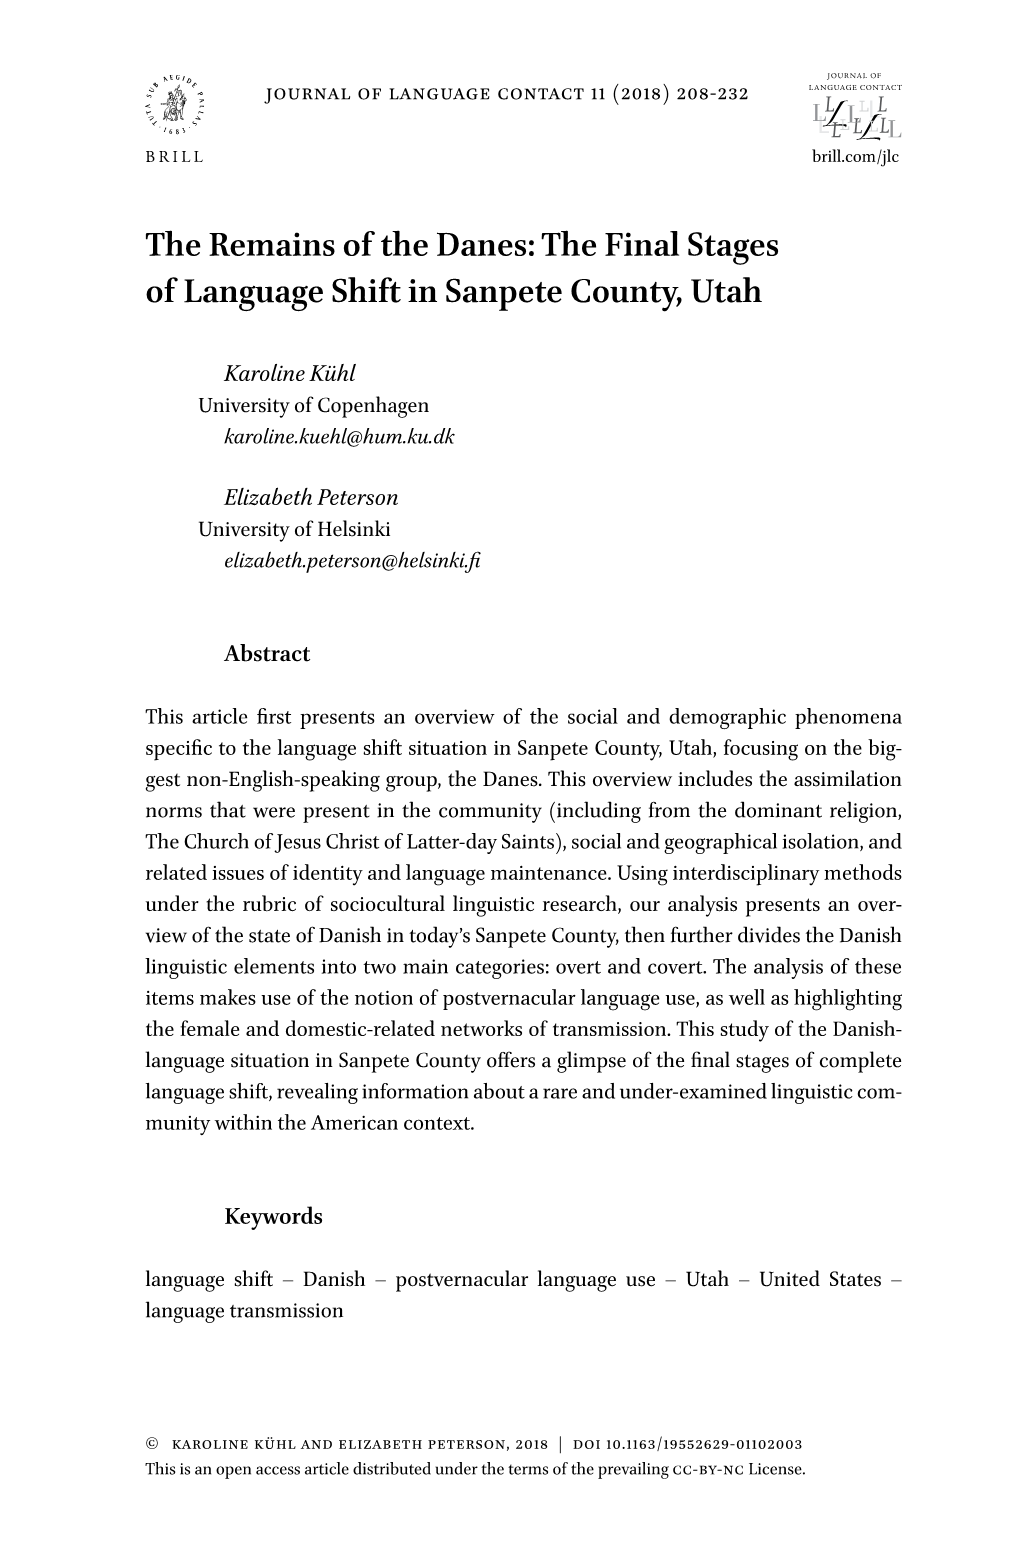 The Remains of the Danes: the Final Stages of Language Shift in Sanpete County, Utah